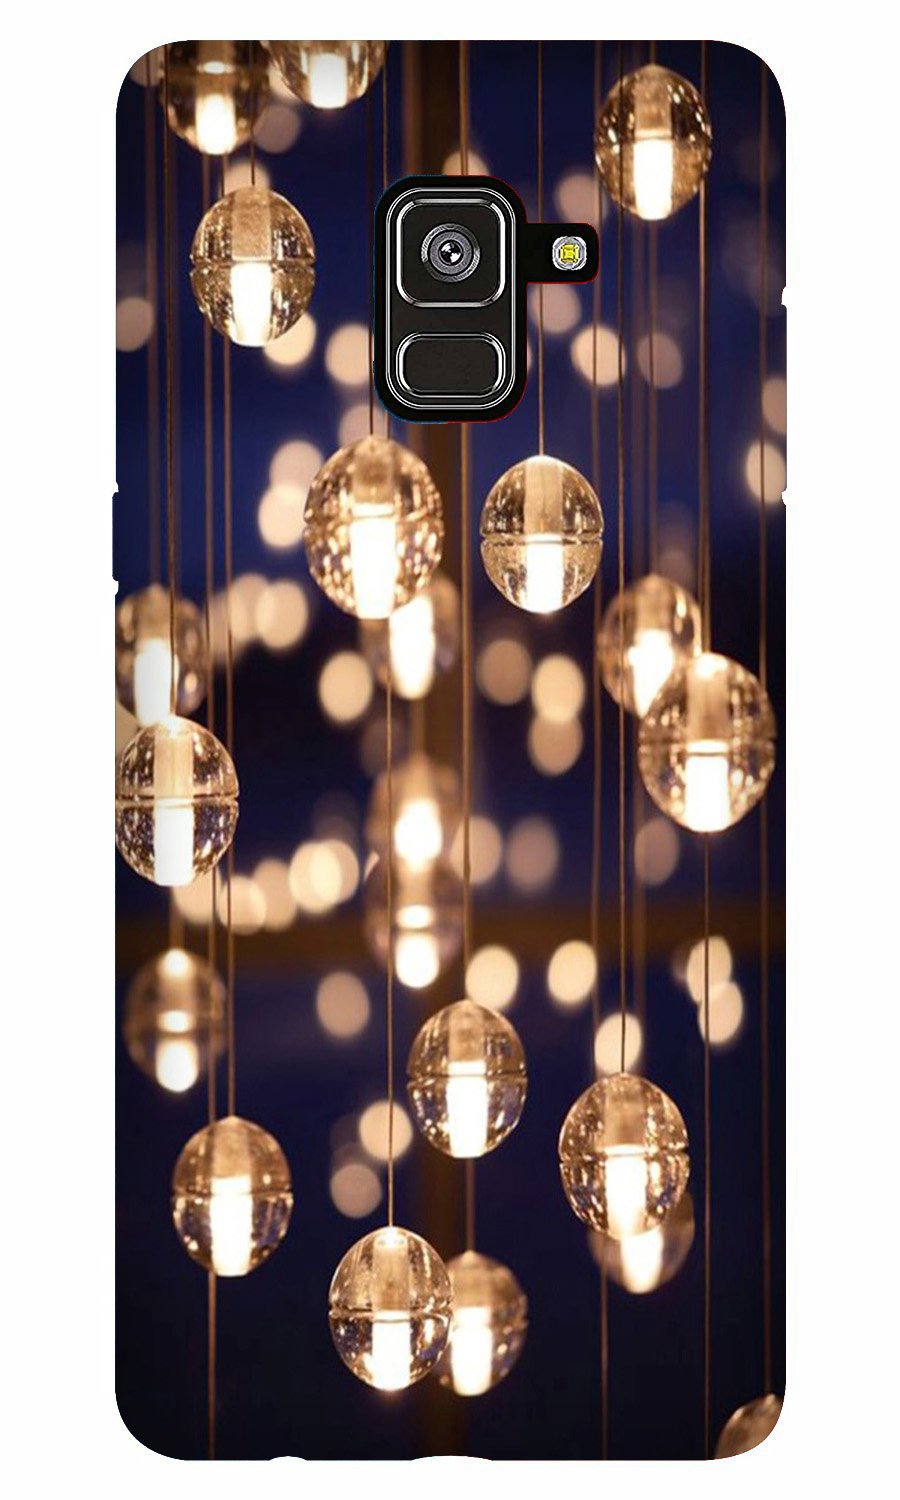 Party Bulb2 Case for Galaxy A8 Plus